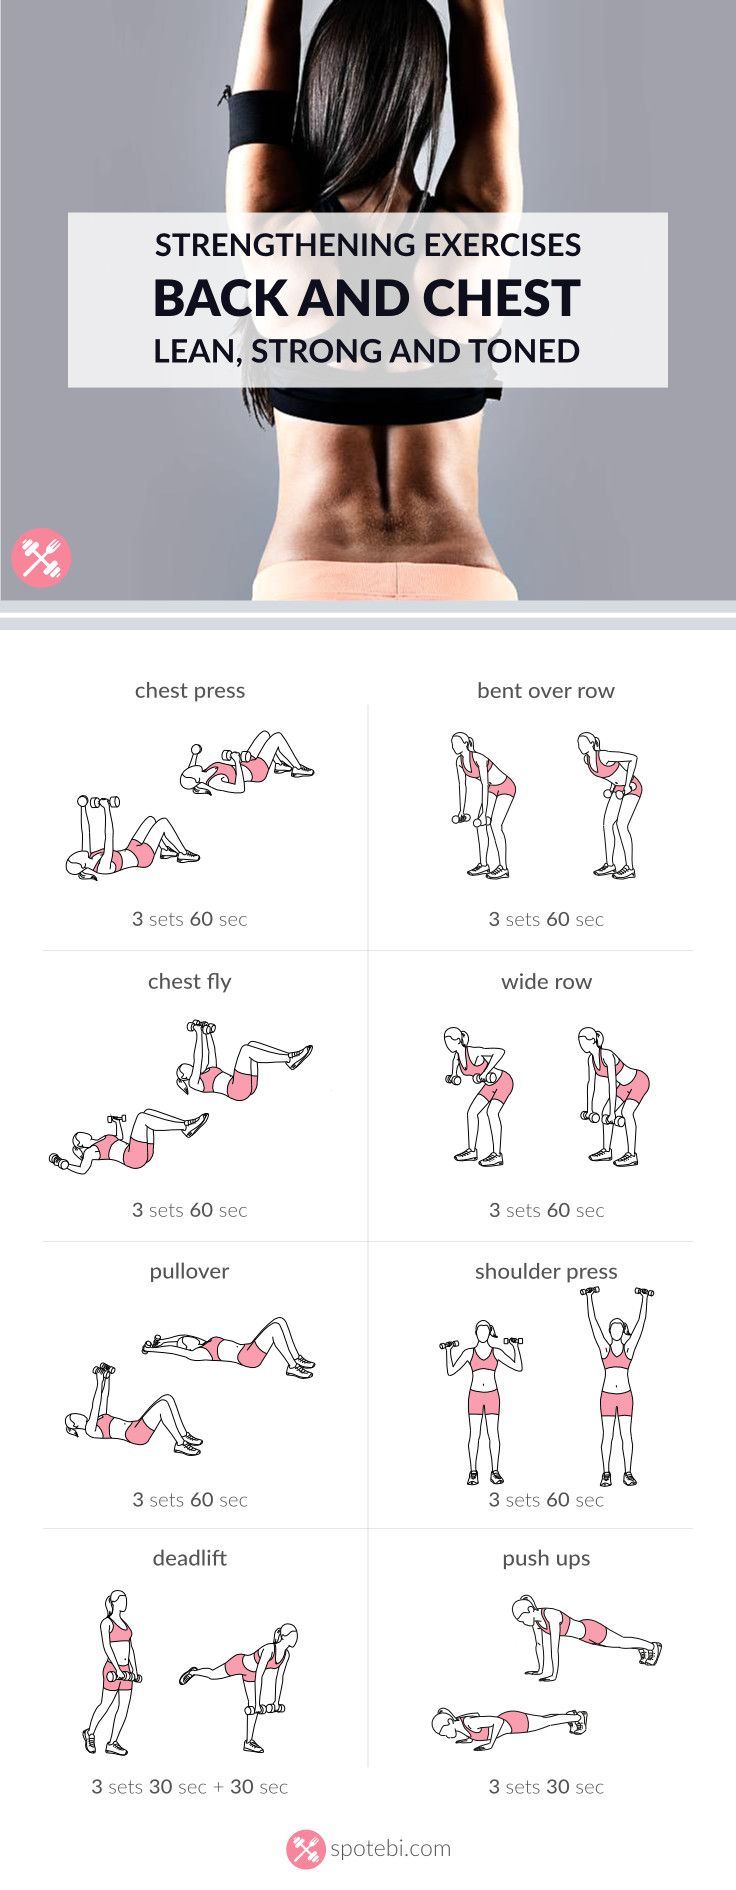 Back & Chest Workout. Each exercise 60 sec or complete 15-20 repetitions, rest 30-60 secs, repeat ciruit 3x